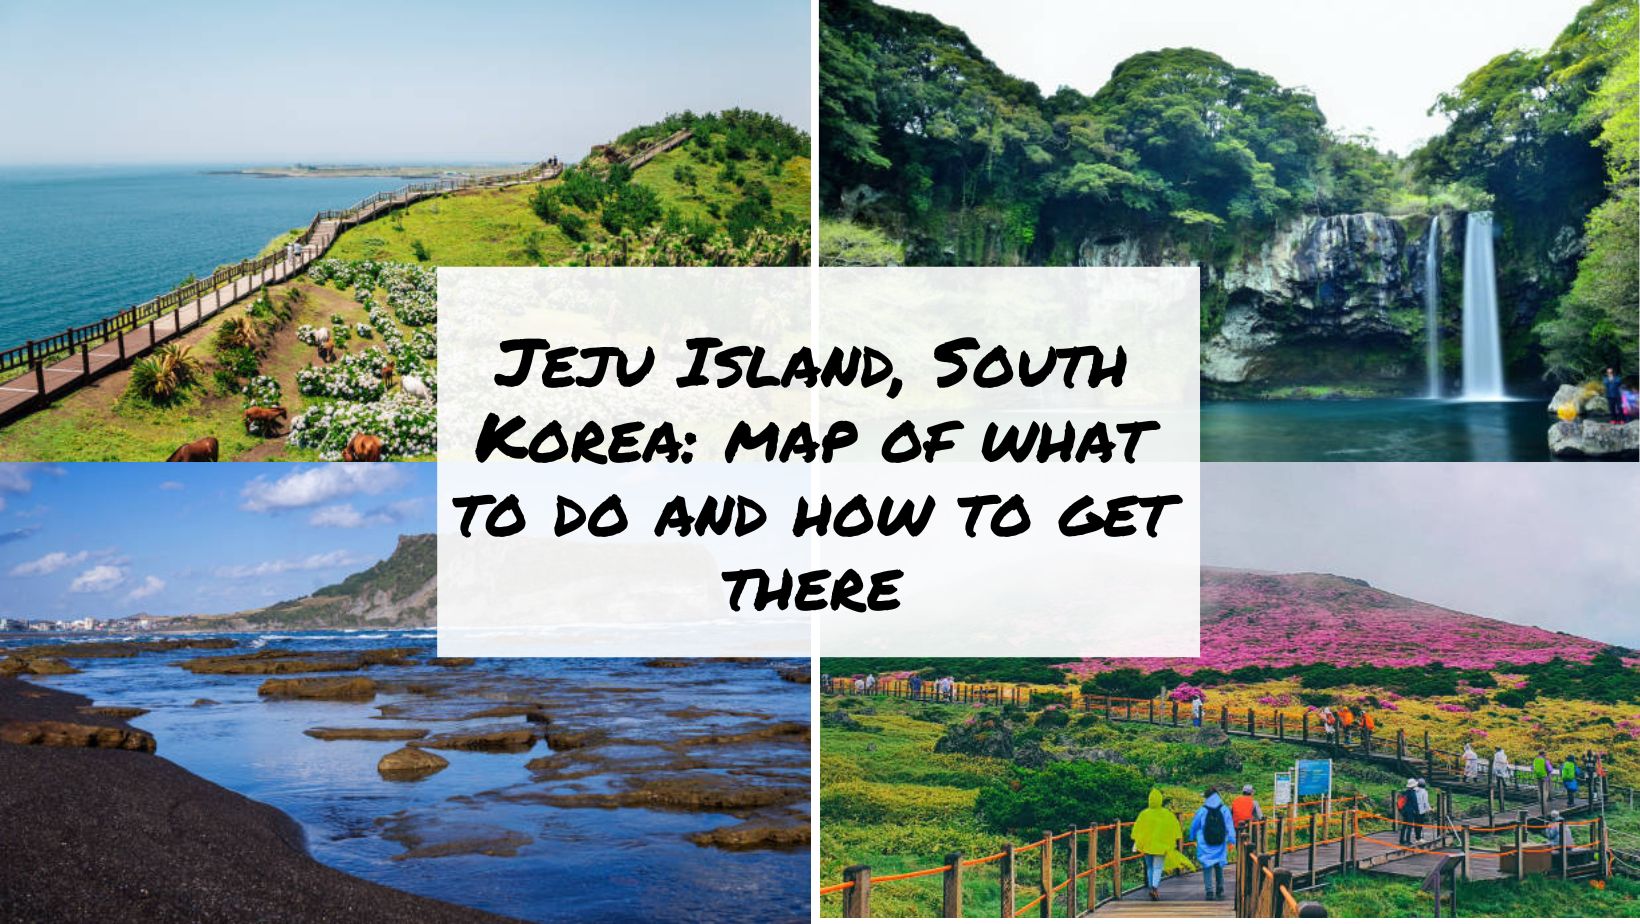 Jeju Island, South Korea map of what to do and how to get there